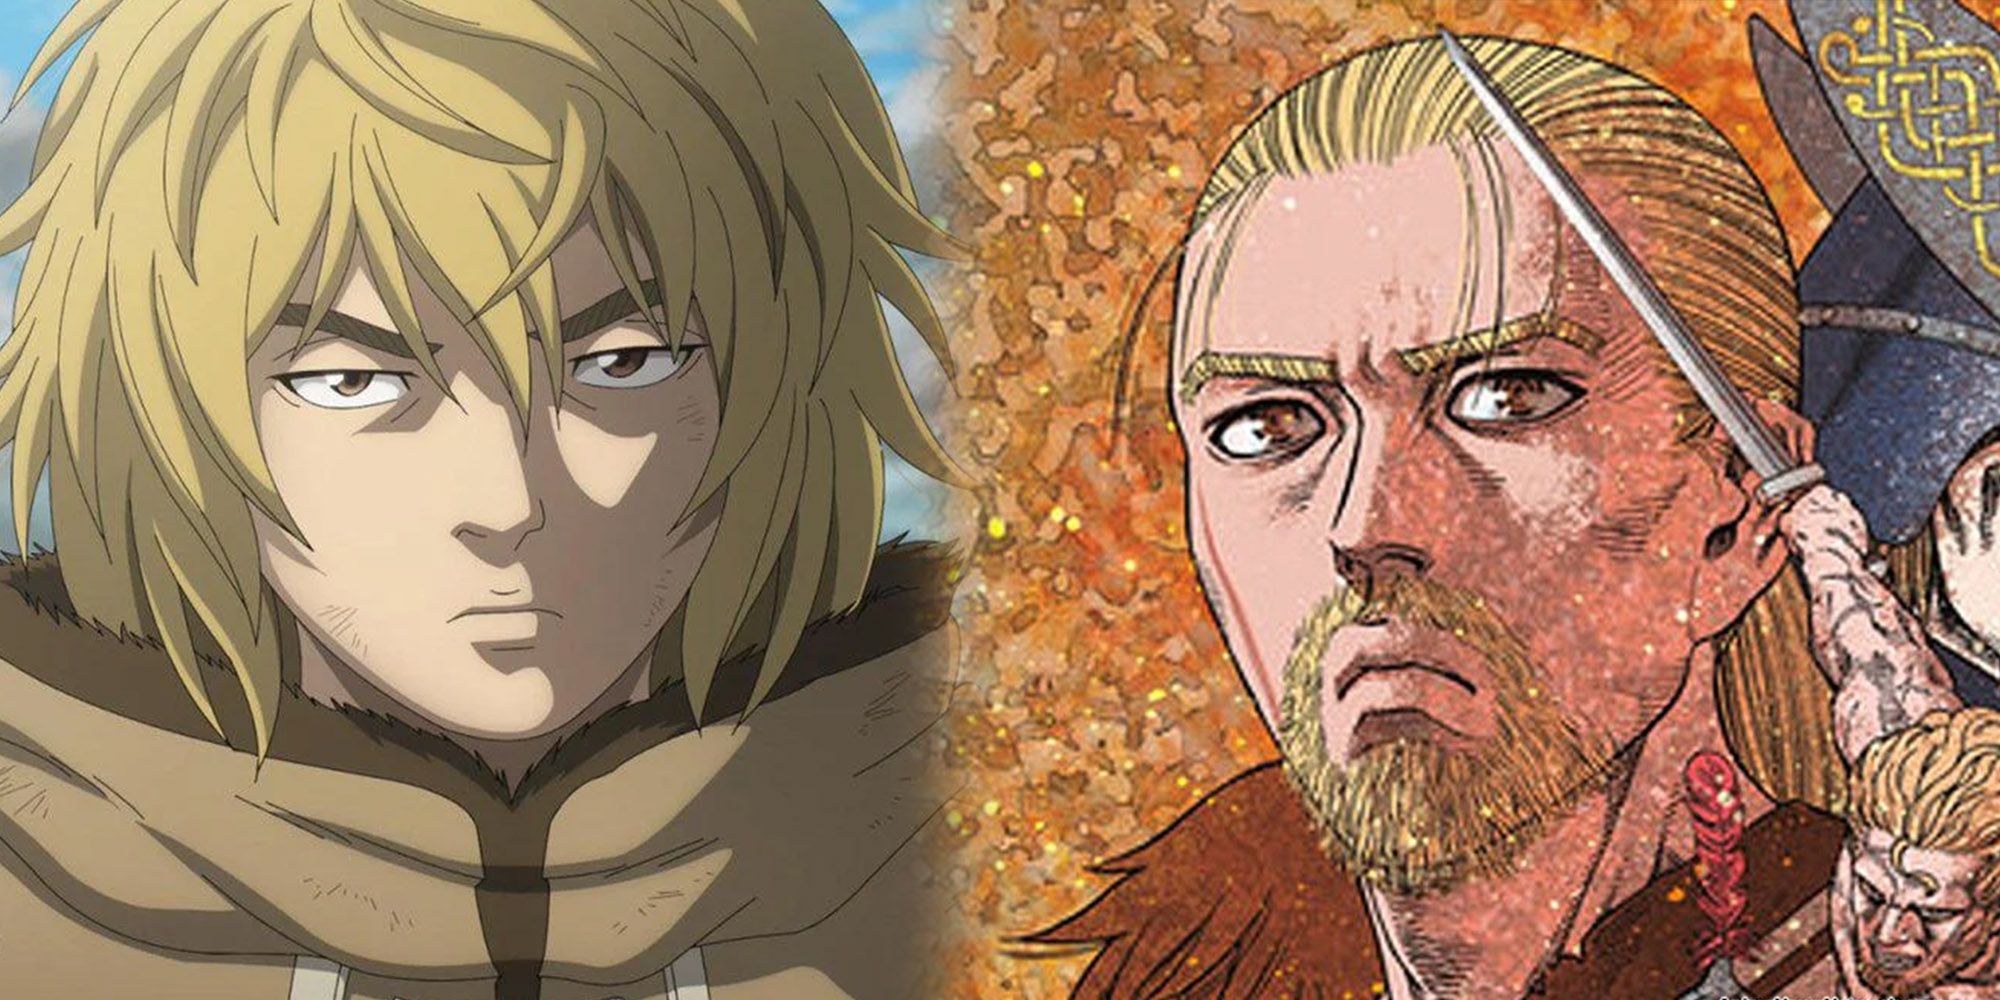 Vinland Saga - Younger Thorfinn From Anime And Older Thorfinn That Will Be Seen In Season 2 Onward